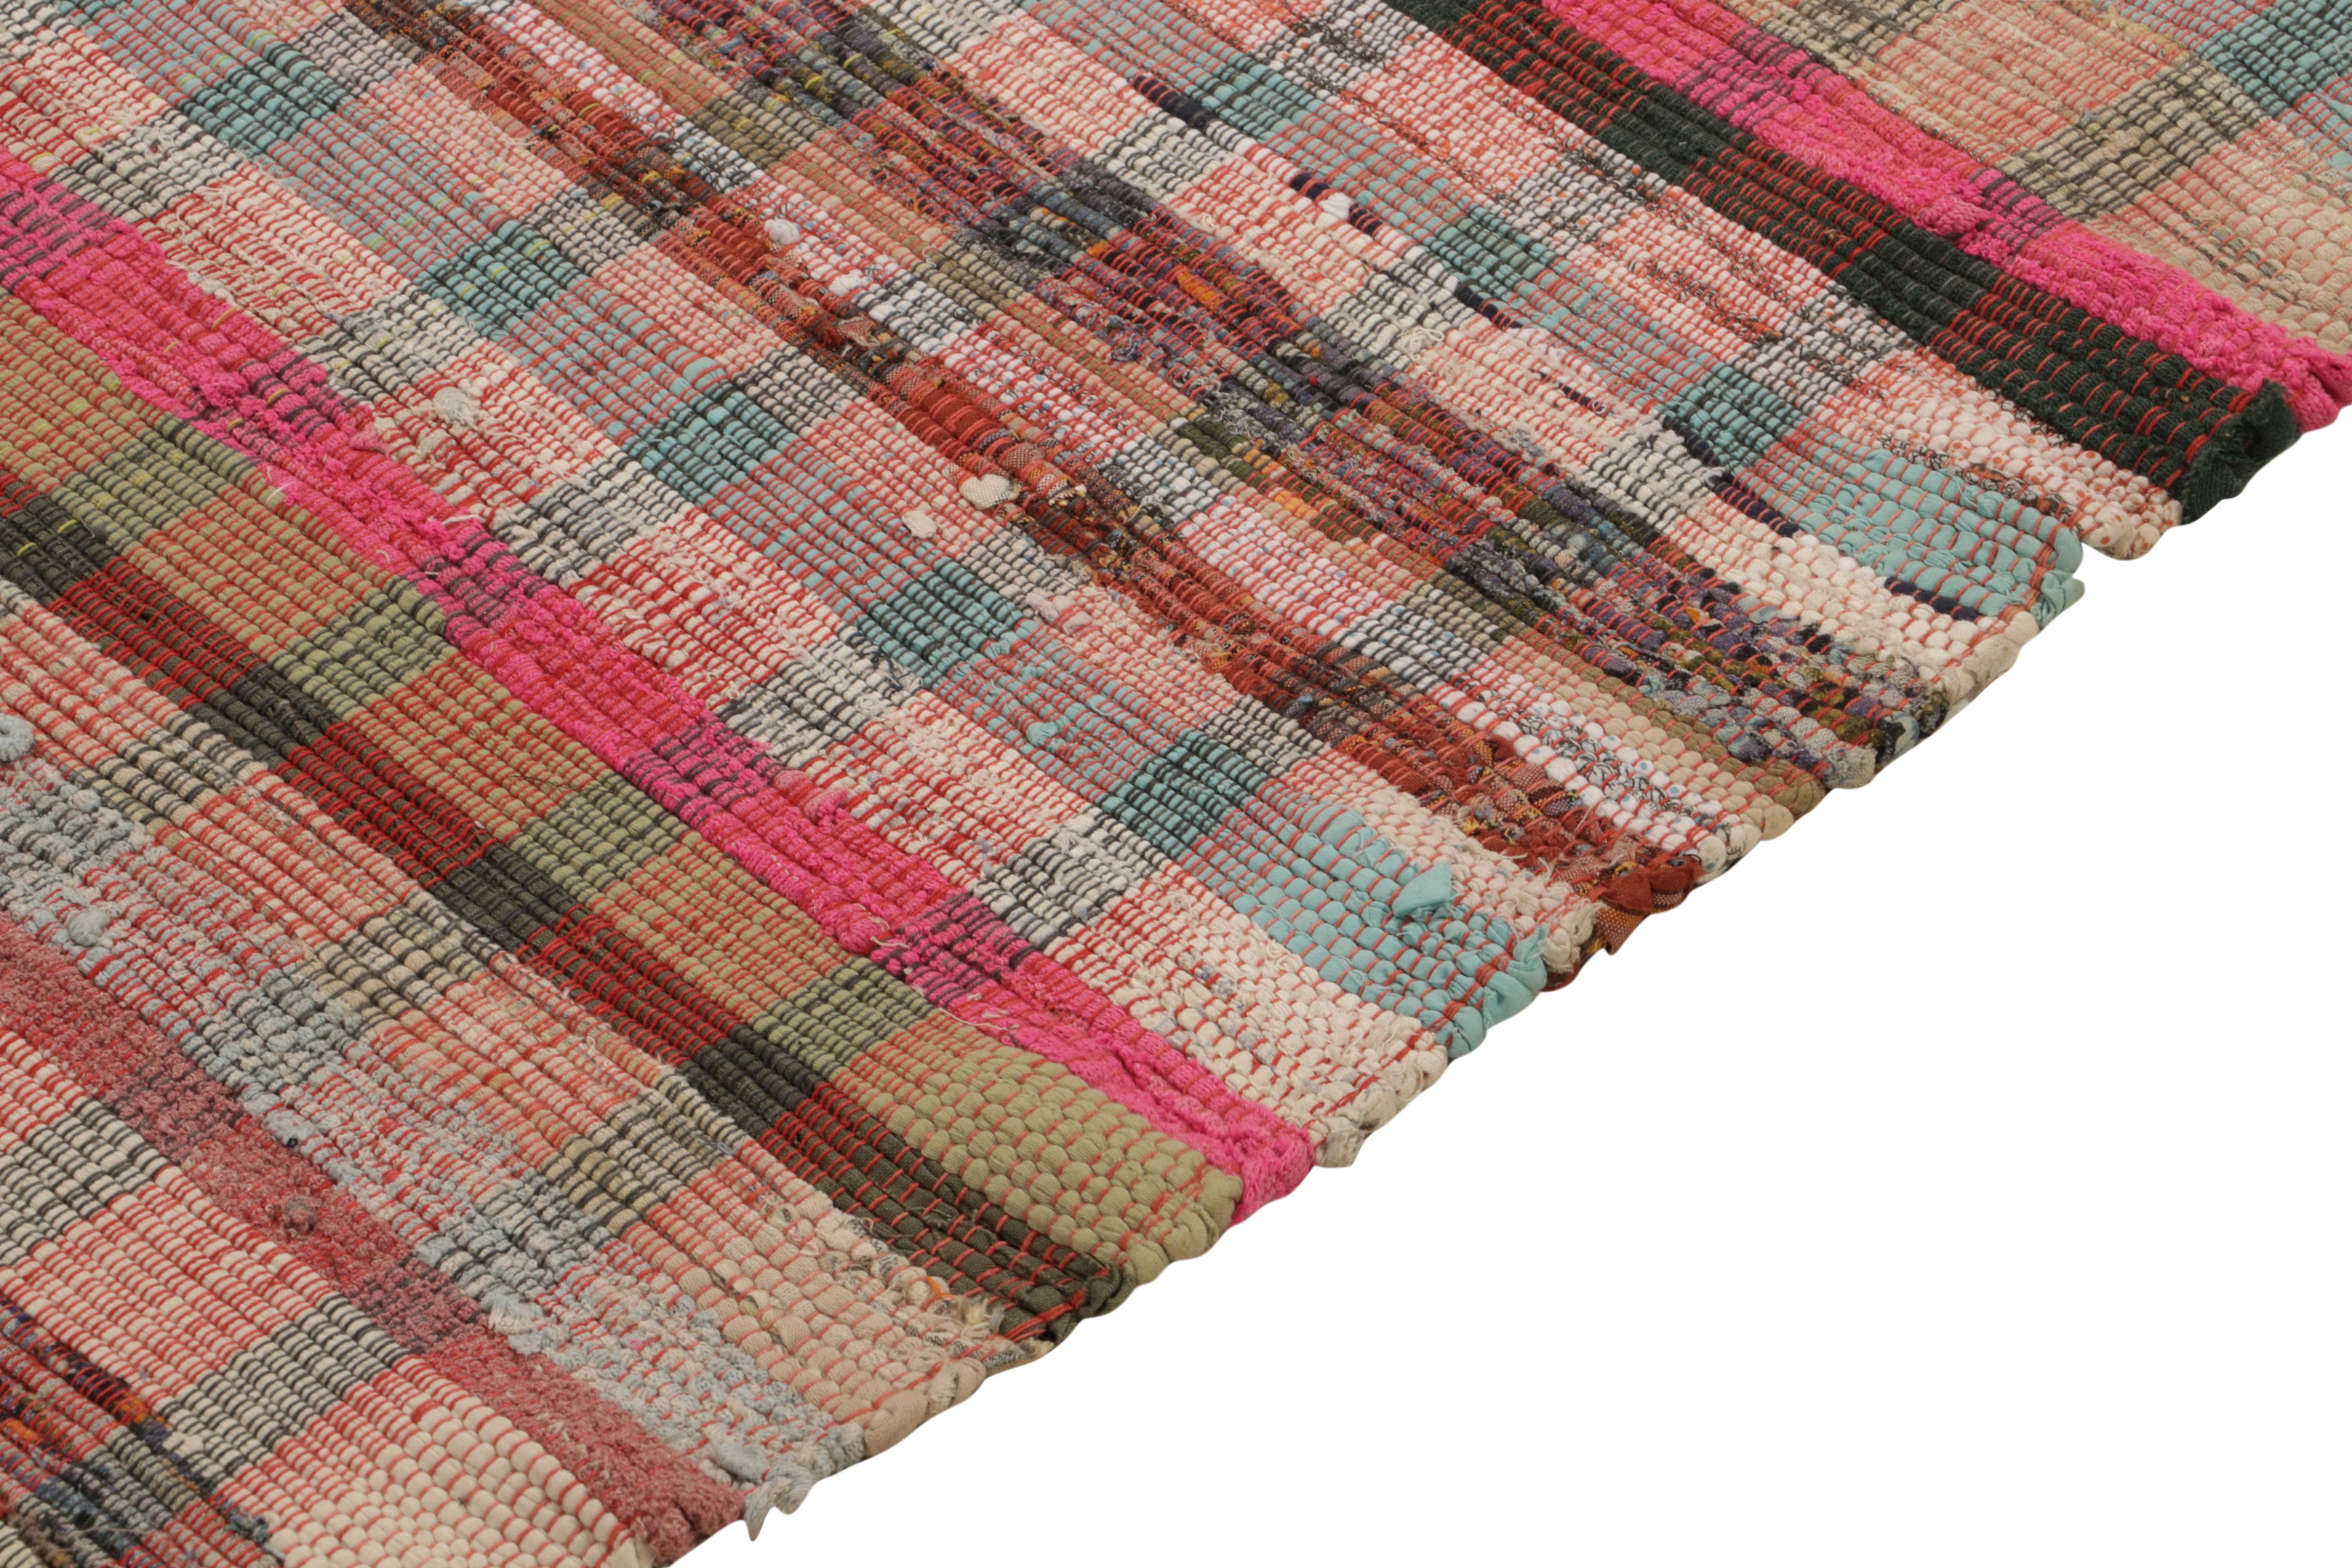 Rug & Kilim’s Oversized Flat Weave Runner in Pink & Colorful Plaid Pattern In New Condition For Sale In Long Island City, NY